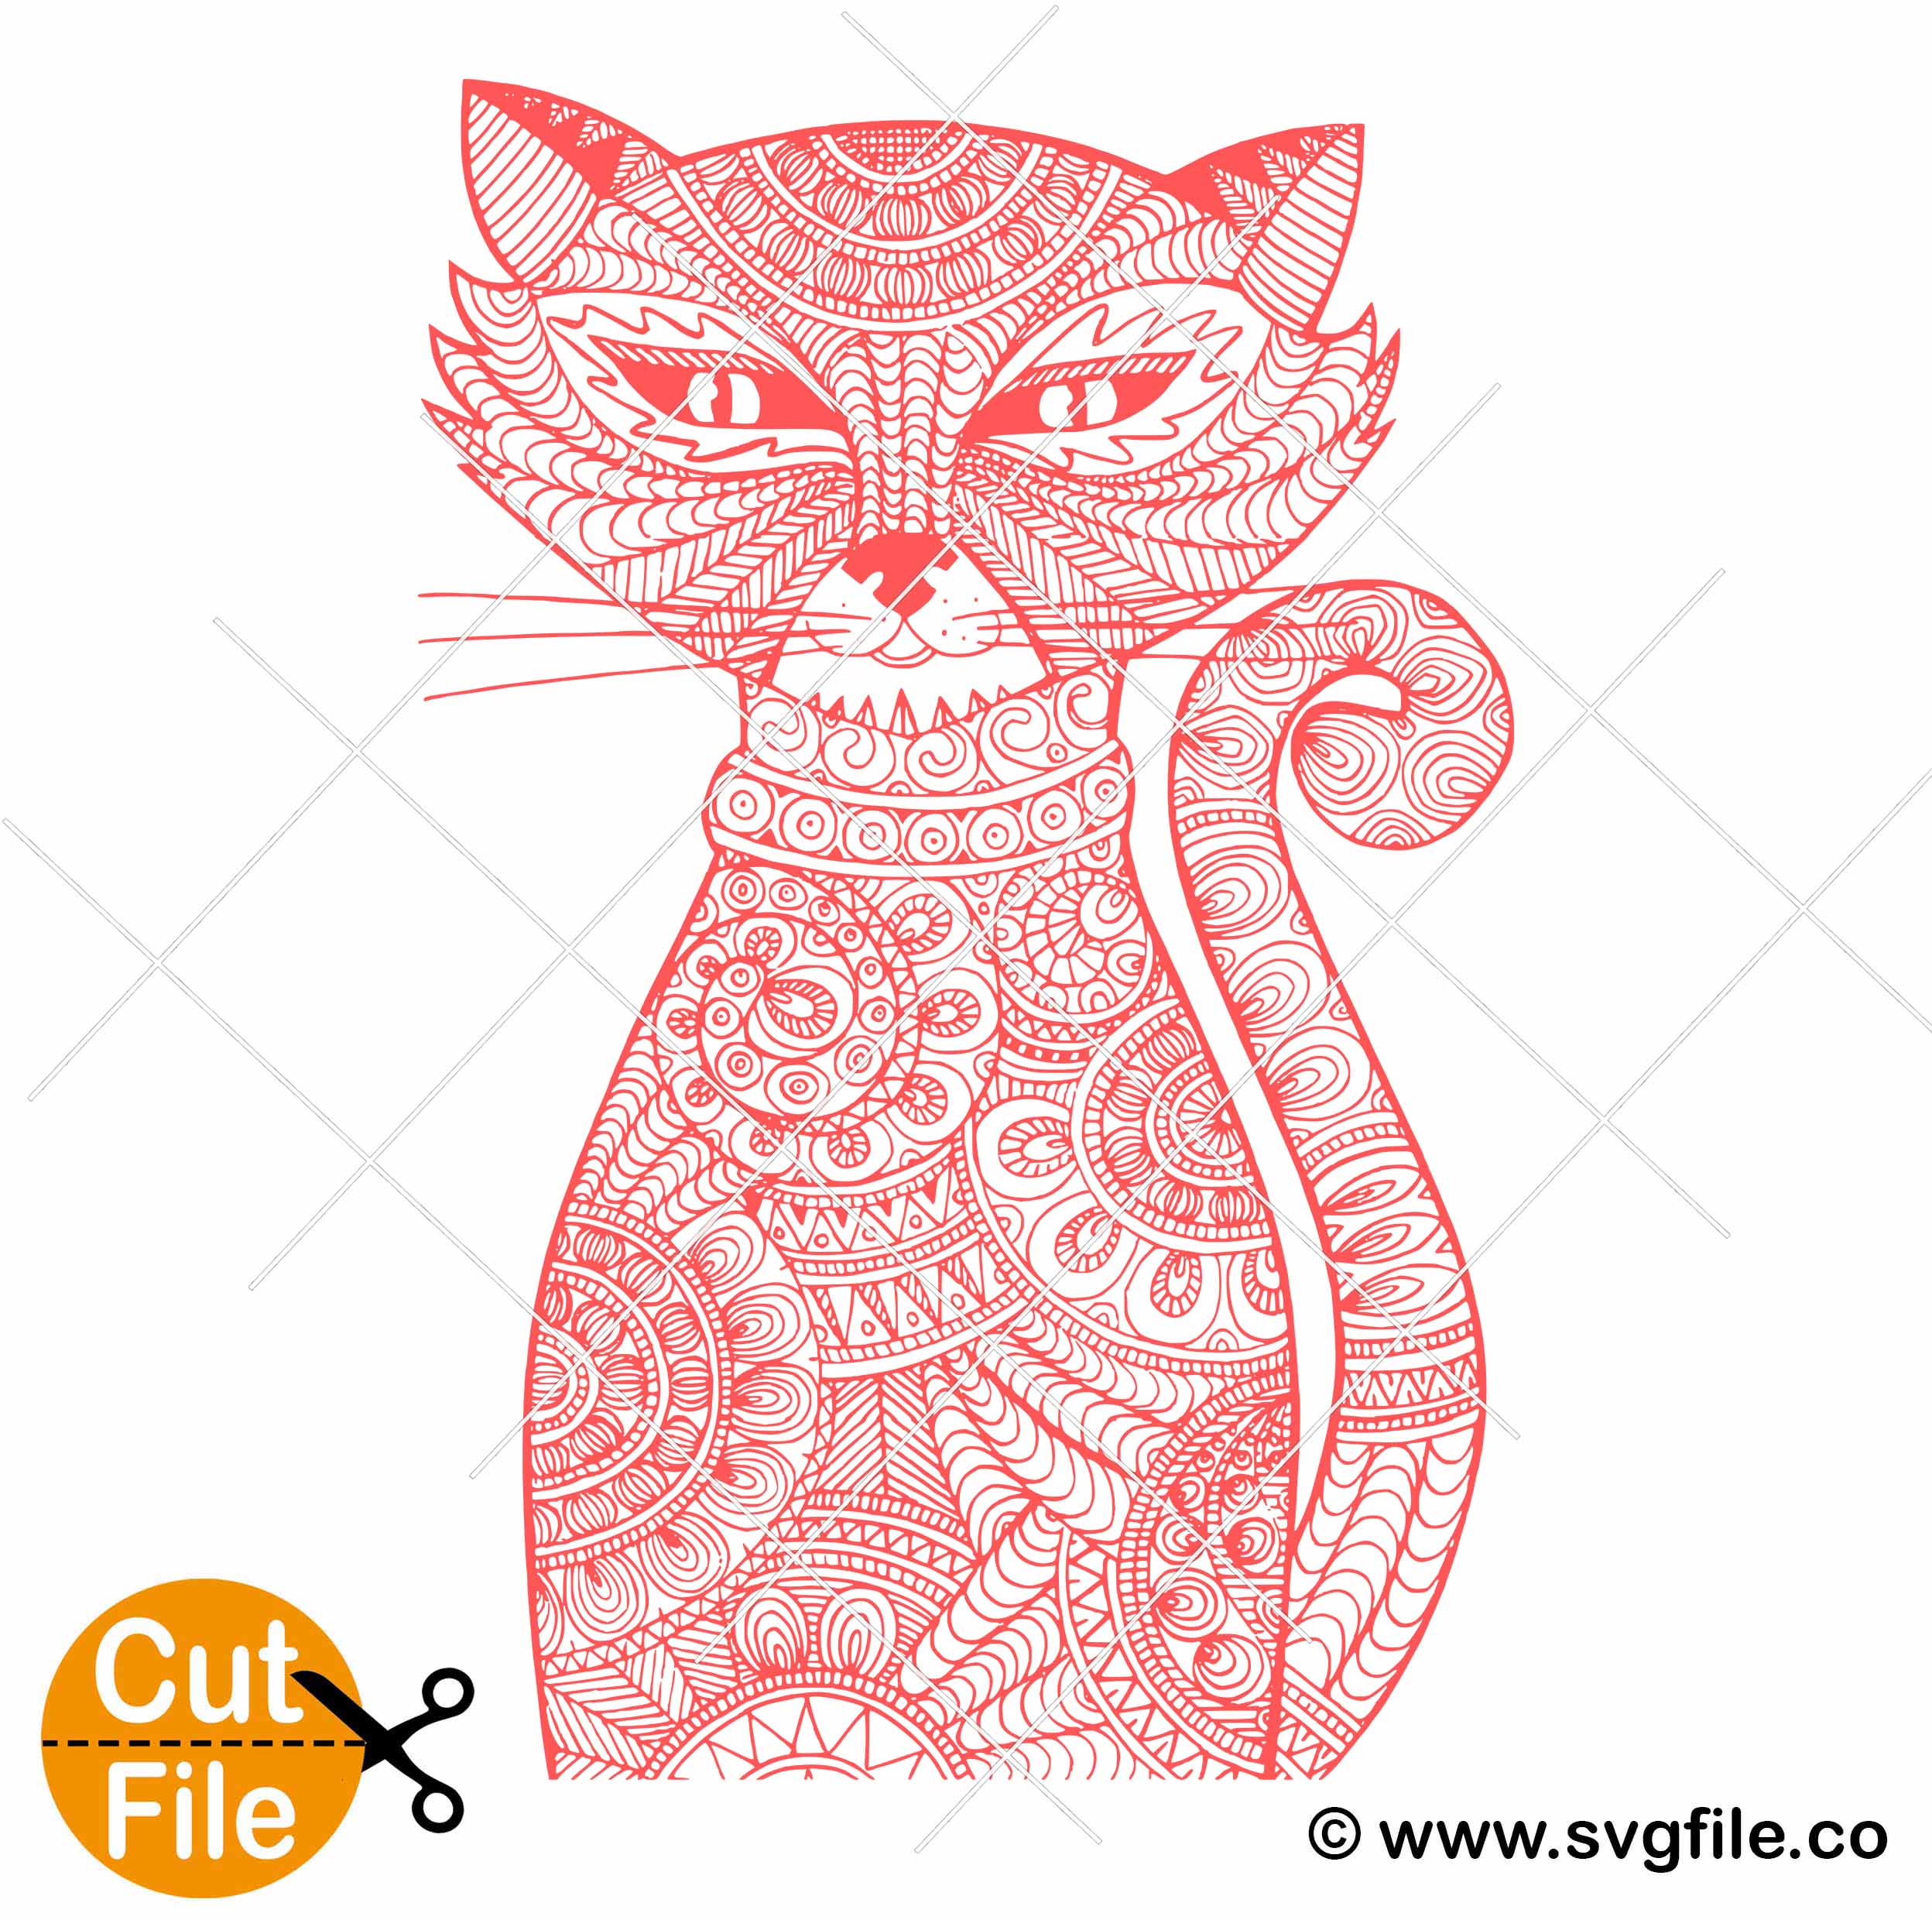 Download Cat Mandala Svg Svgfile Co 0 99 Cent Svg Files Life Time Access